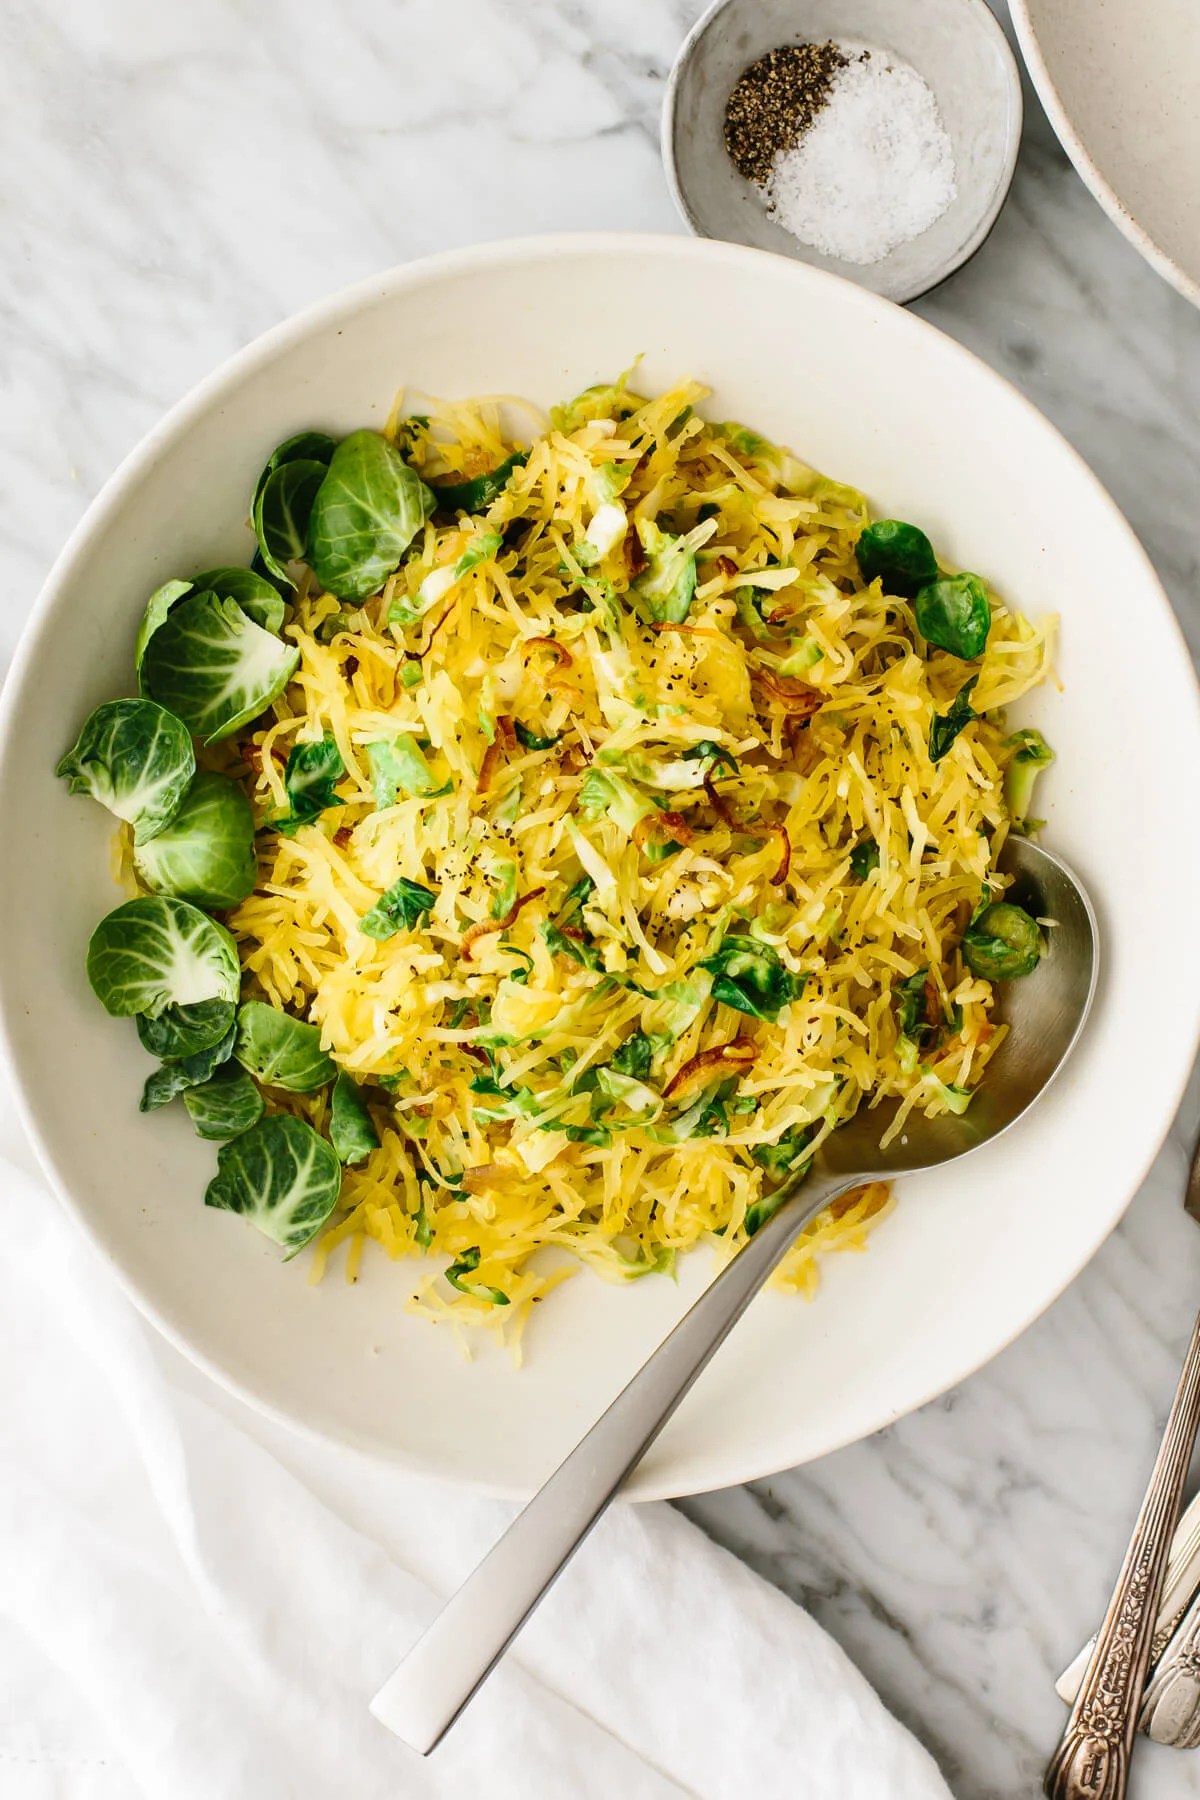 Spaghetti squash, Brussels sprouts, and crispy shallots side dish in a bowl.